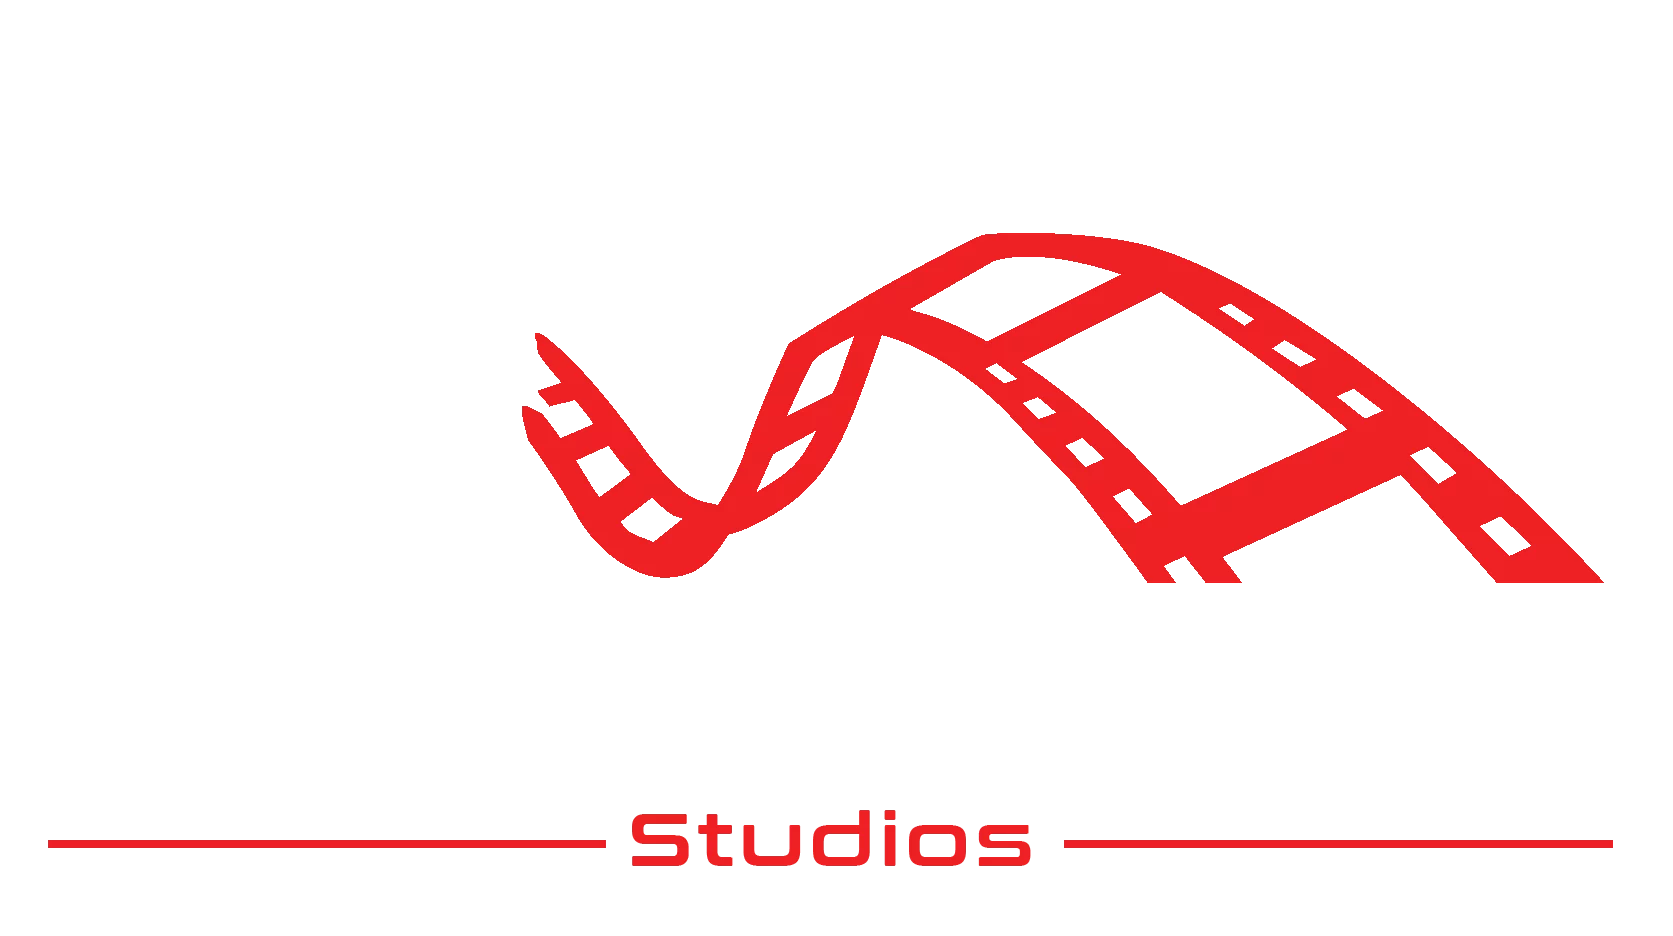 A red and white logo for the reedrick studios.